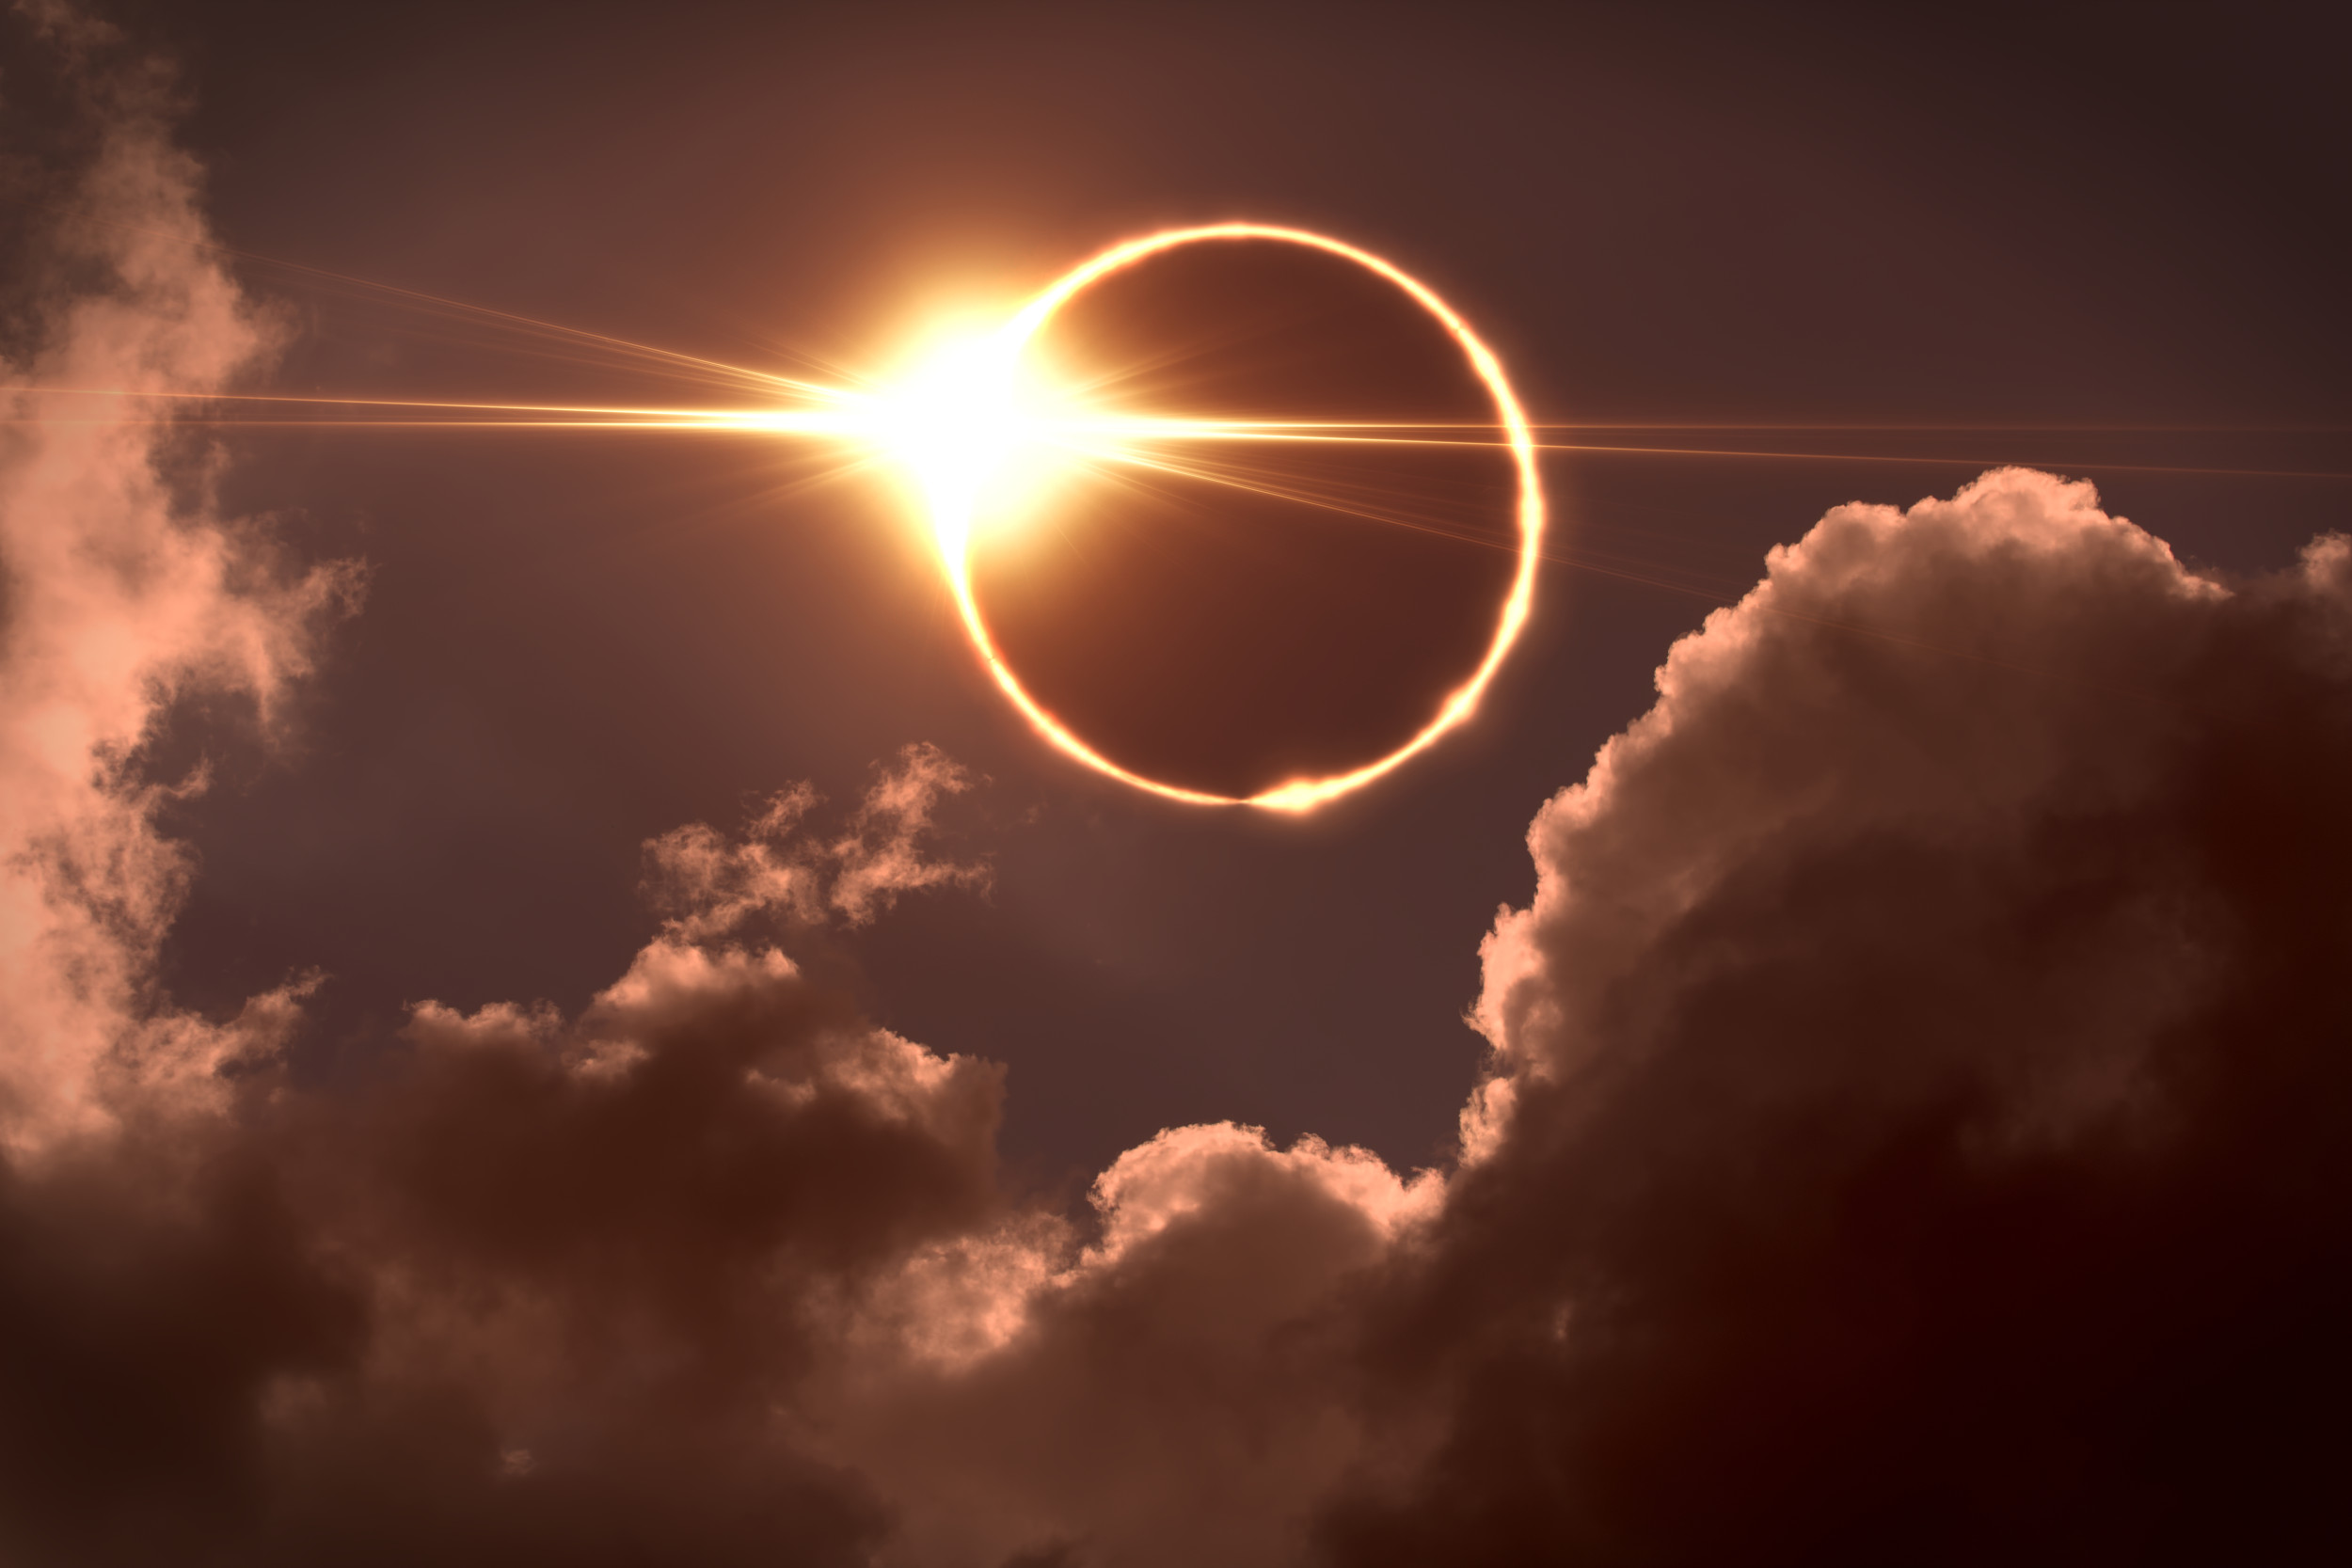 The latest weather forecasts reveal best cities for solar eclipse viewing